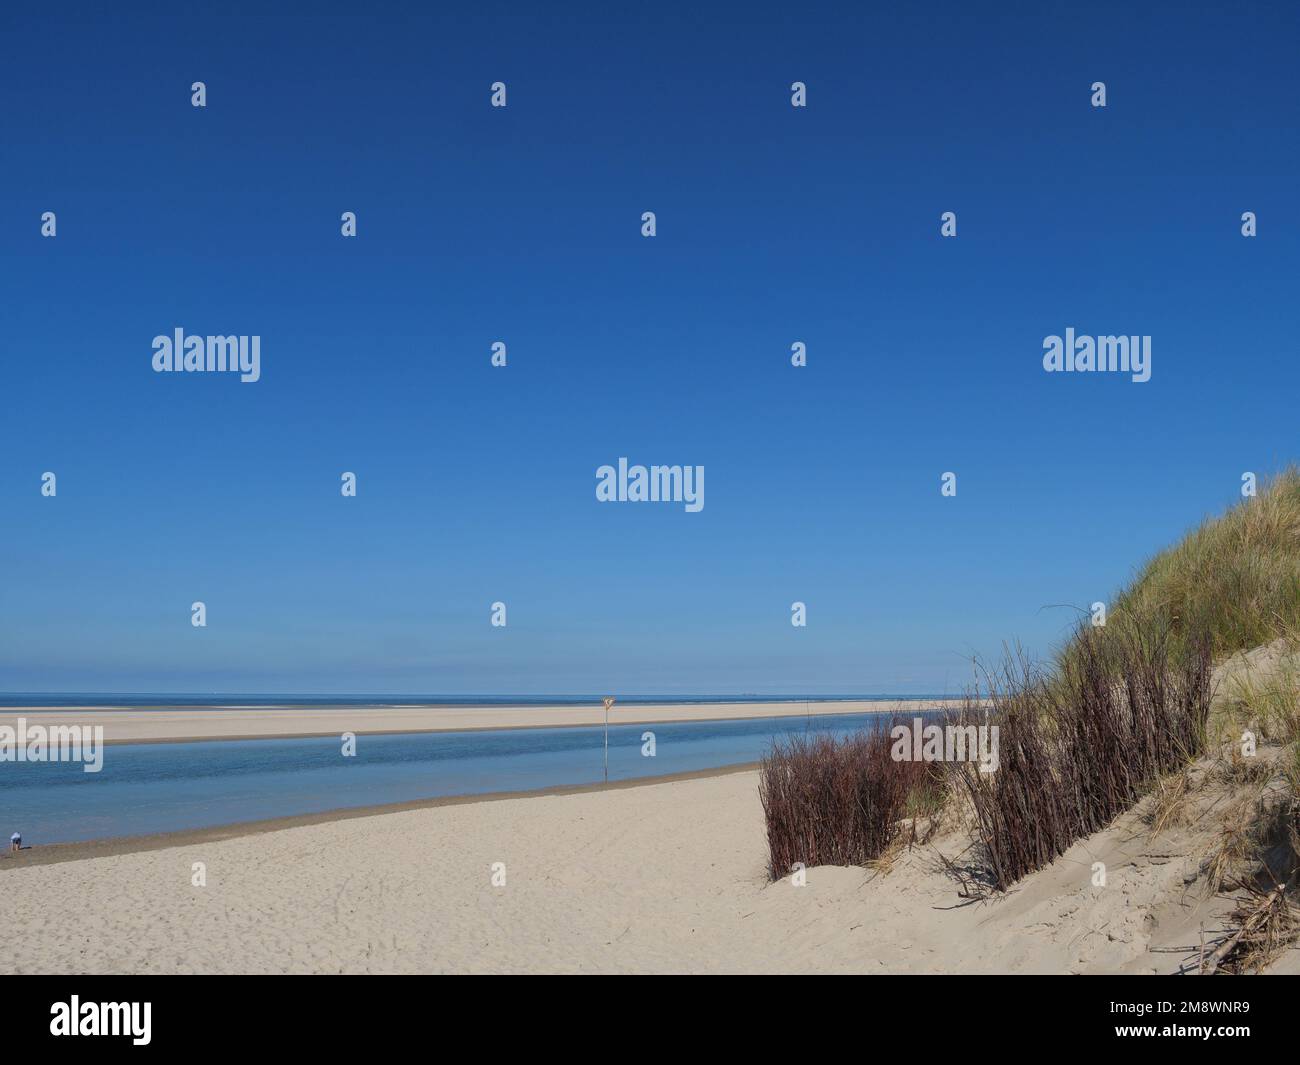 A beautiful view of the sea from beach in an island of Spiekeroog village in Germany Stock Photo